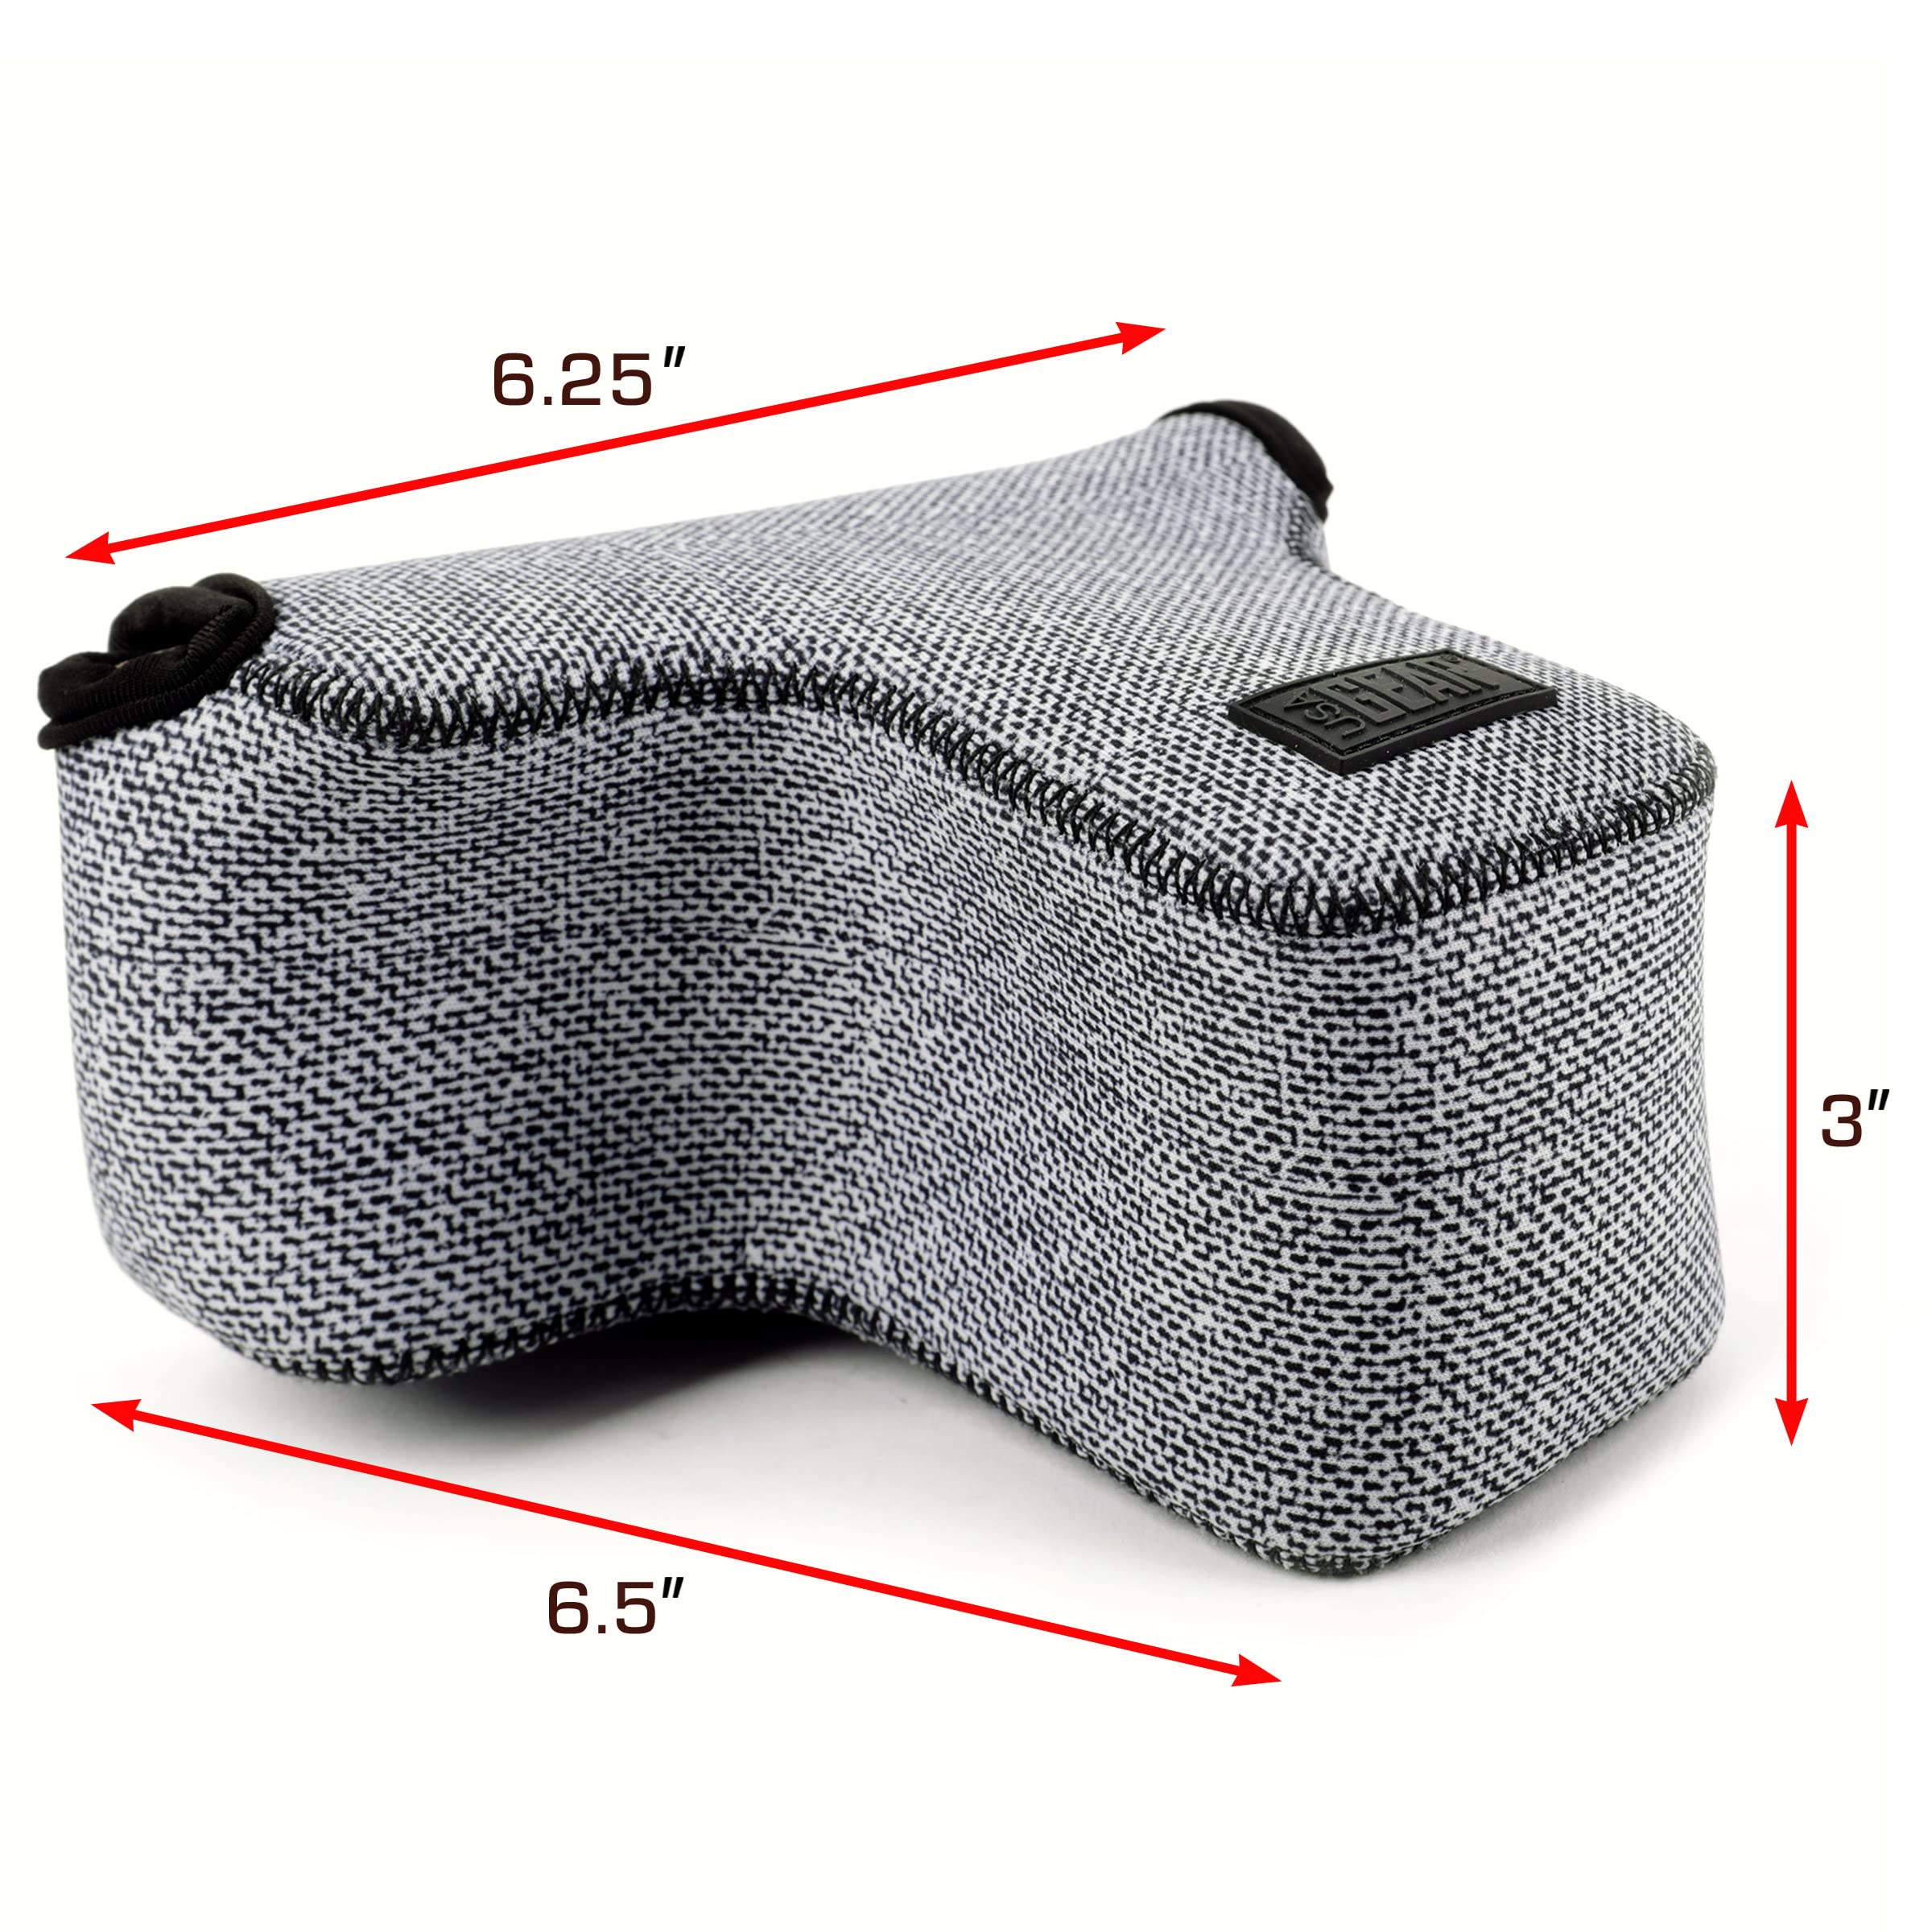 USA Gear DSLR Camera Sleeve with Neoprene Protection, Holster Belt Loop and Accessory Storage - Compatible with Canon EOS Rebel T7, 850D, 250D, R7, Nikon D3500, D5600 and More - Grey Woven Pattern